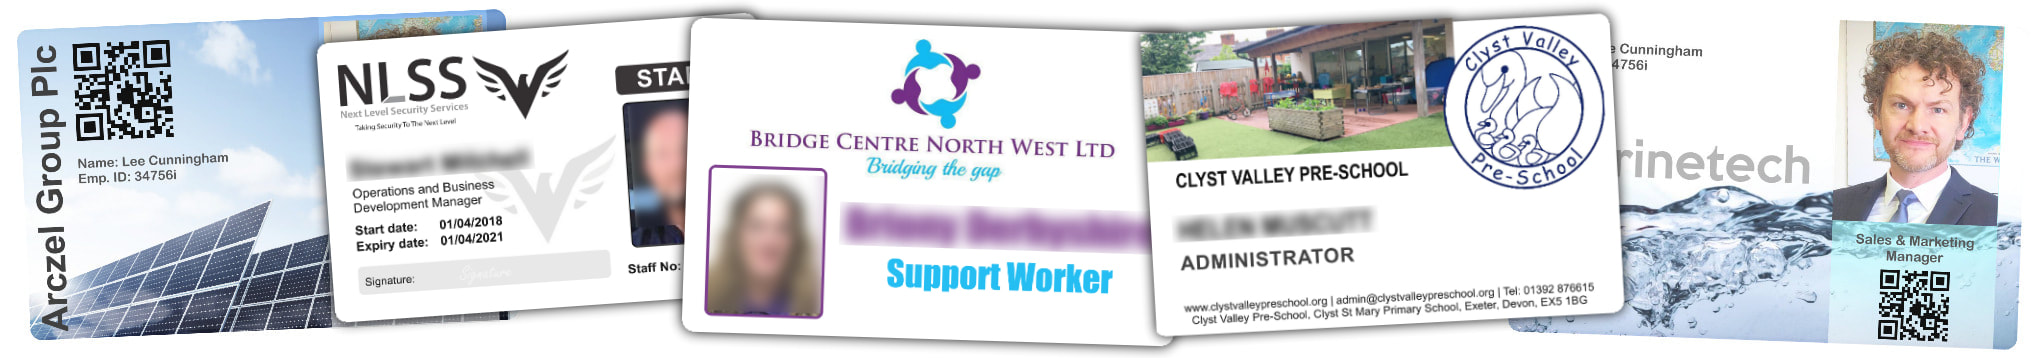 York examples of staff photo ID cards | samples of employee Identity card printing | Workers ID cards printed in York 